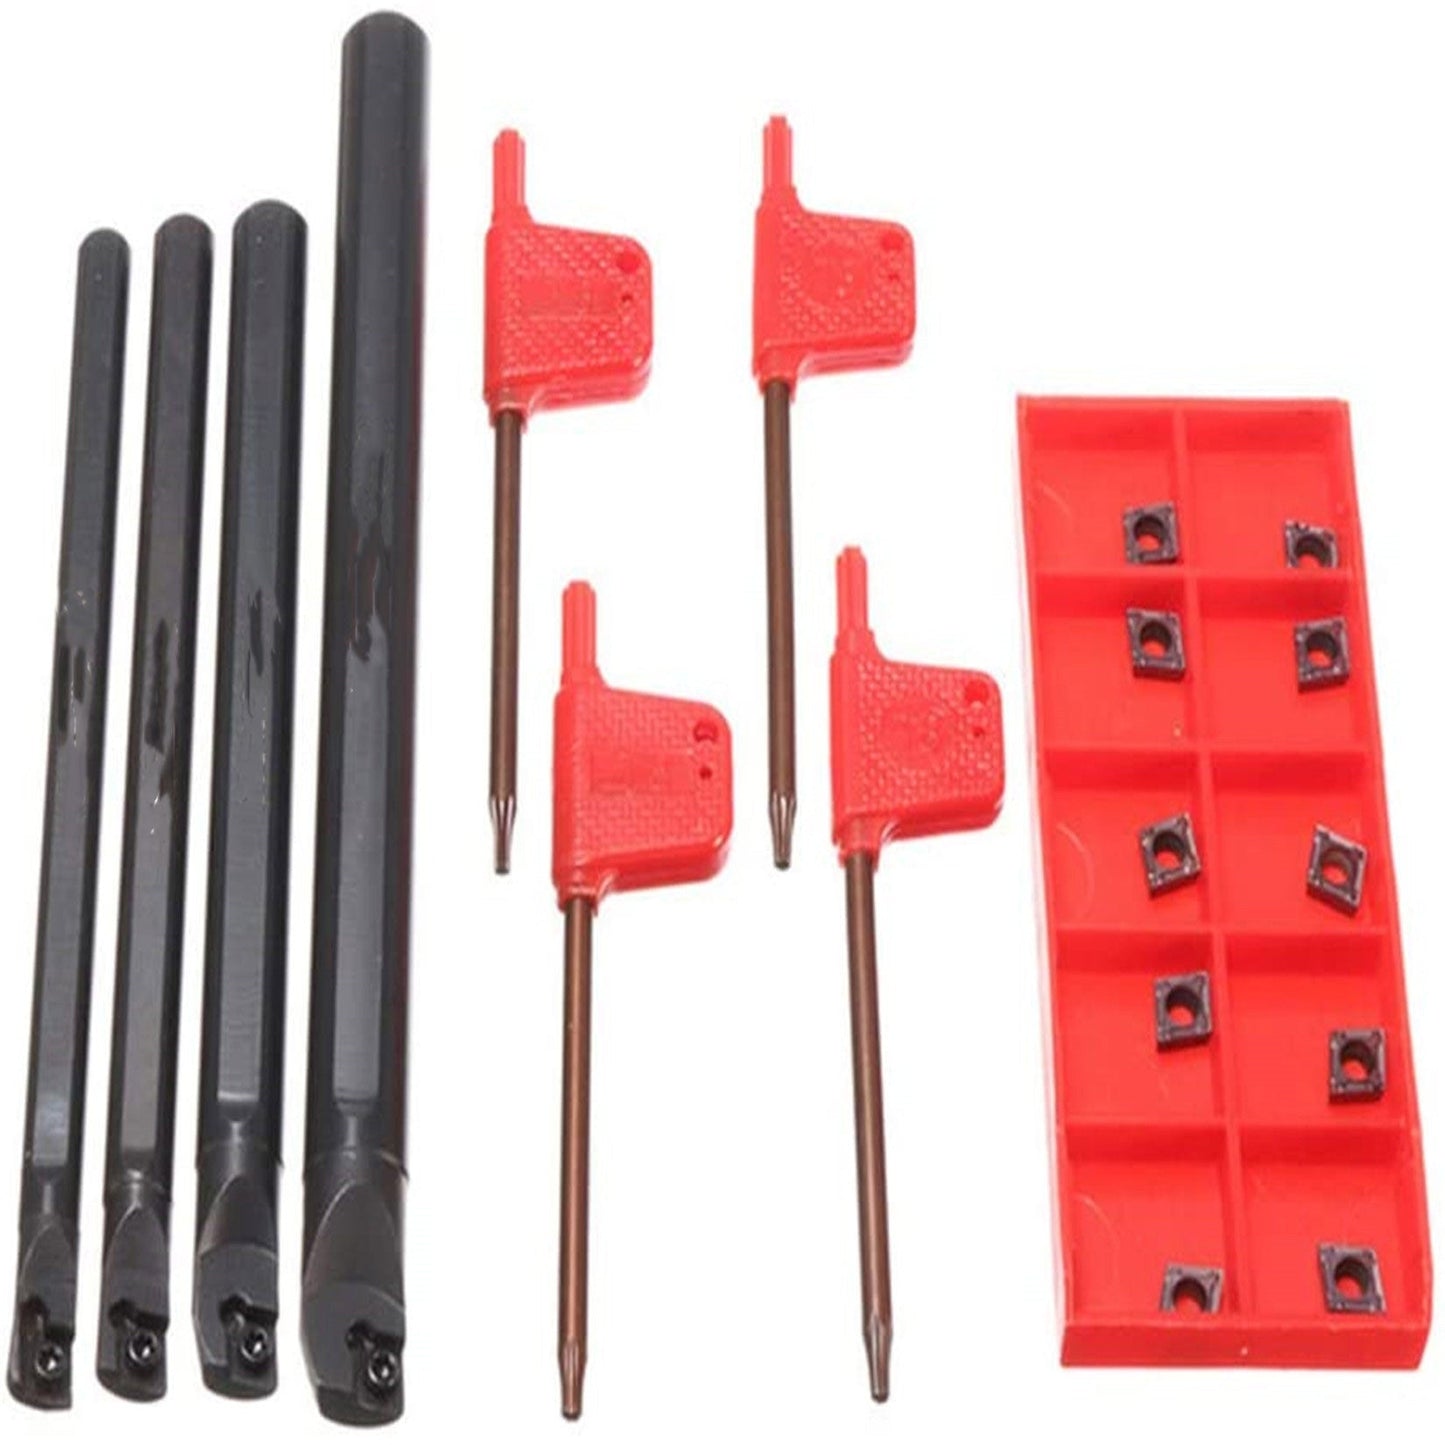 findmall  Lathe Turning Tools 4Pcs S07K/S08K/S10K/S12M-SCLCR06 Boring Bar Turning Tools Holder Carbide Turning Tool Holder Set with 10pcs CCMT0602 Carbide Inserts Fit for Finishing Operations FINDMALLPARTS